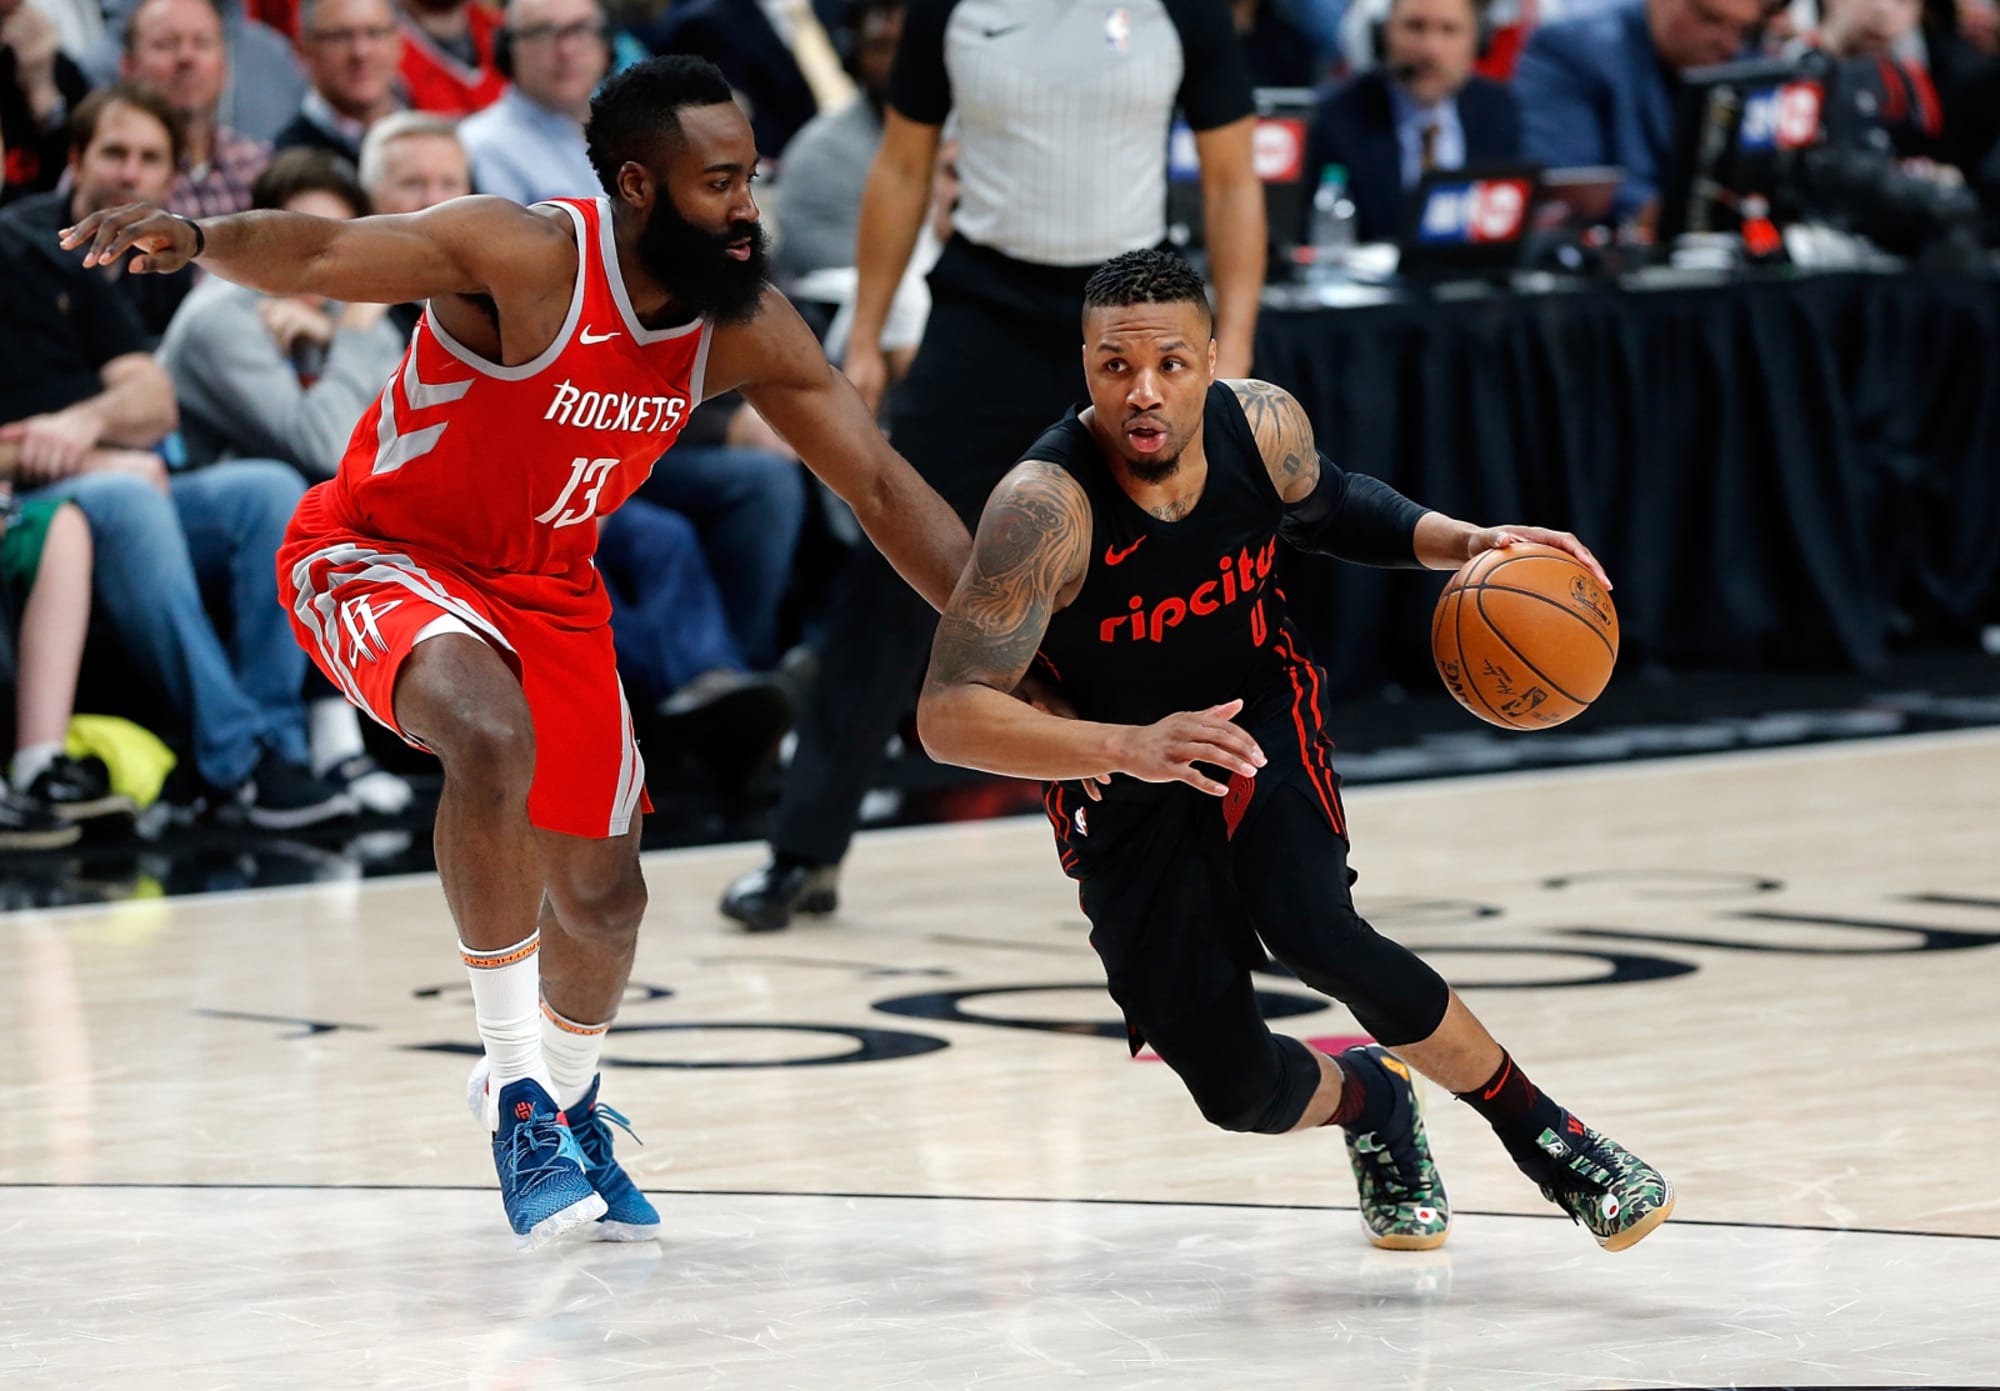 The portland trail blazers are in a close battle with the houston rockets a...